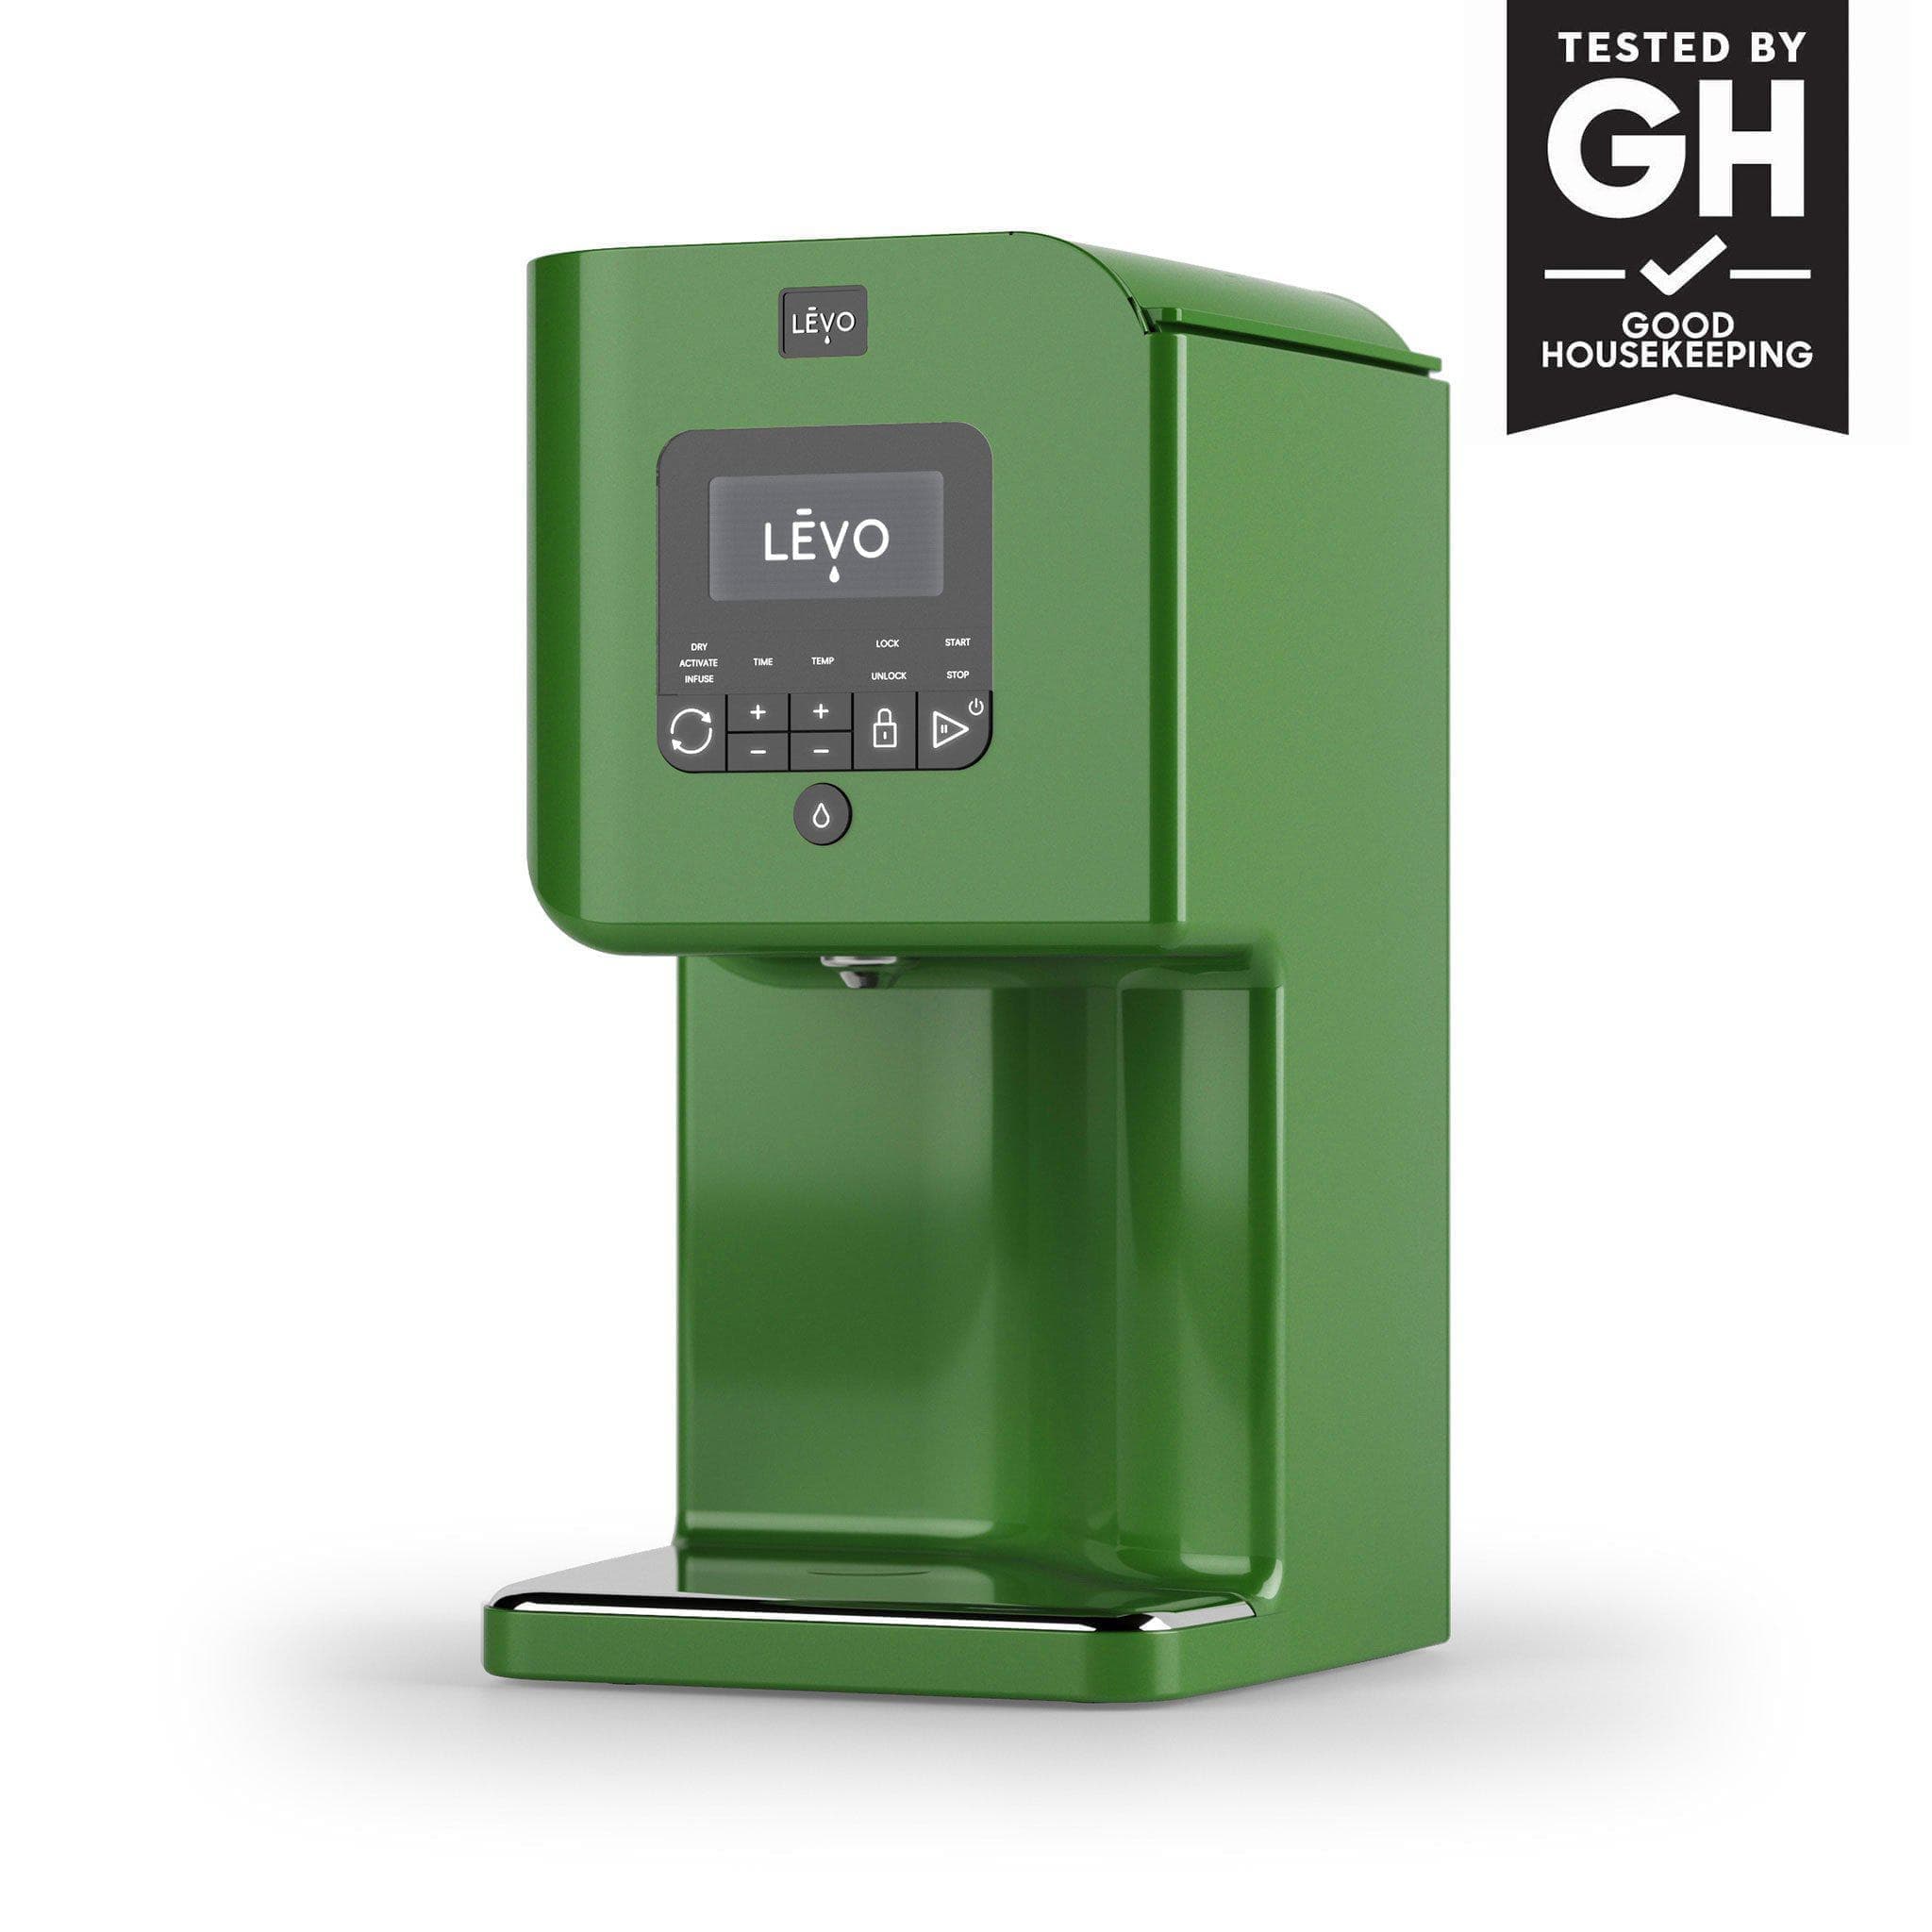 LEVO II in NEW Garden Green - tested and approved by Good Housekeeping.